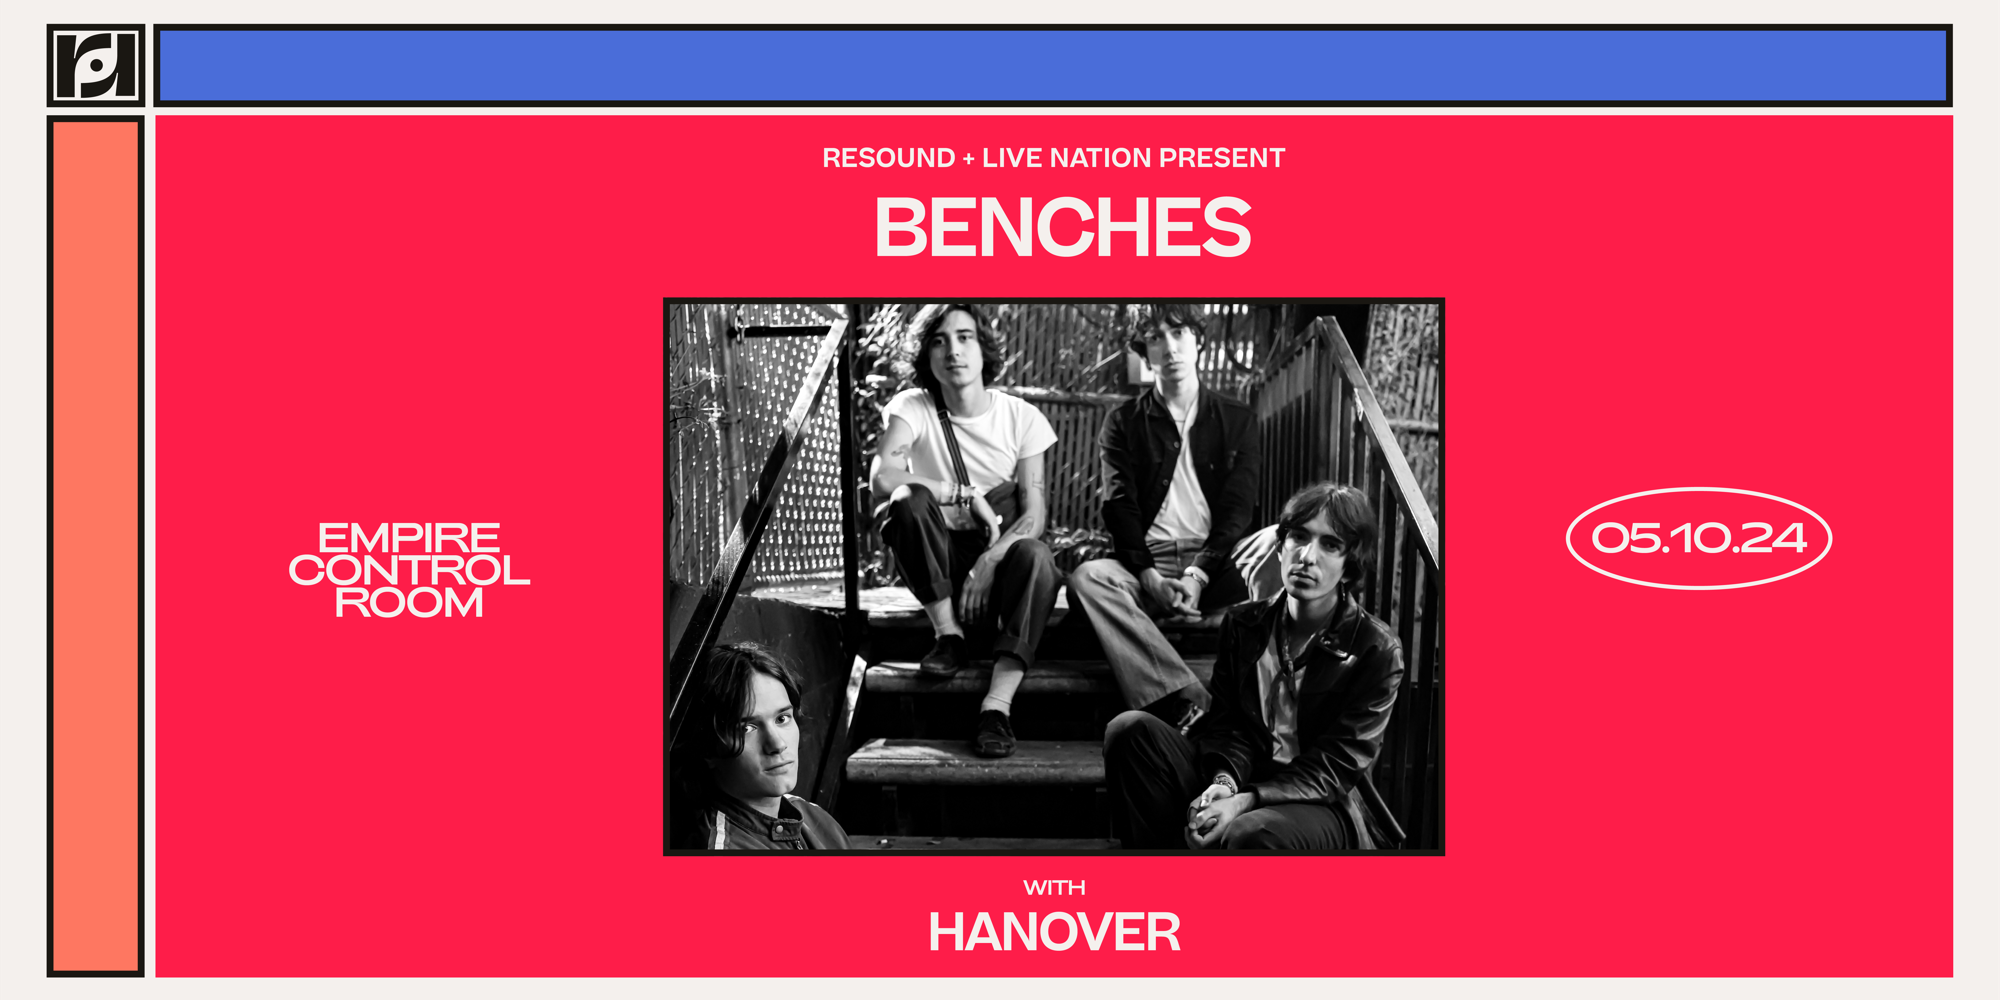 Live Nation & Resound Present: benches w/ Hanover at Empire Control Room promotional image